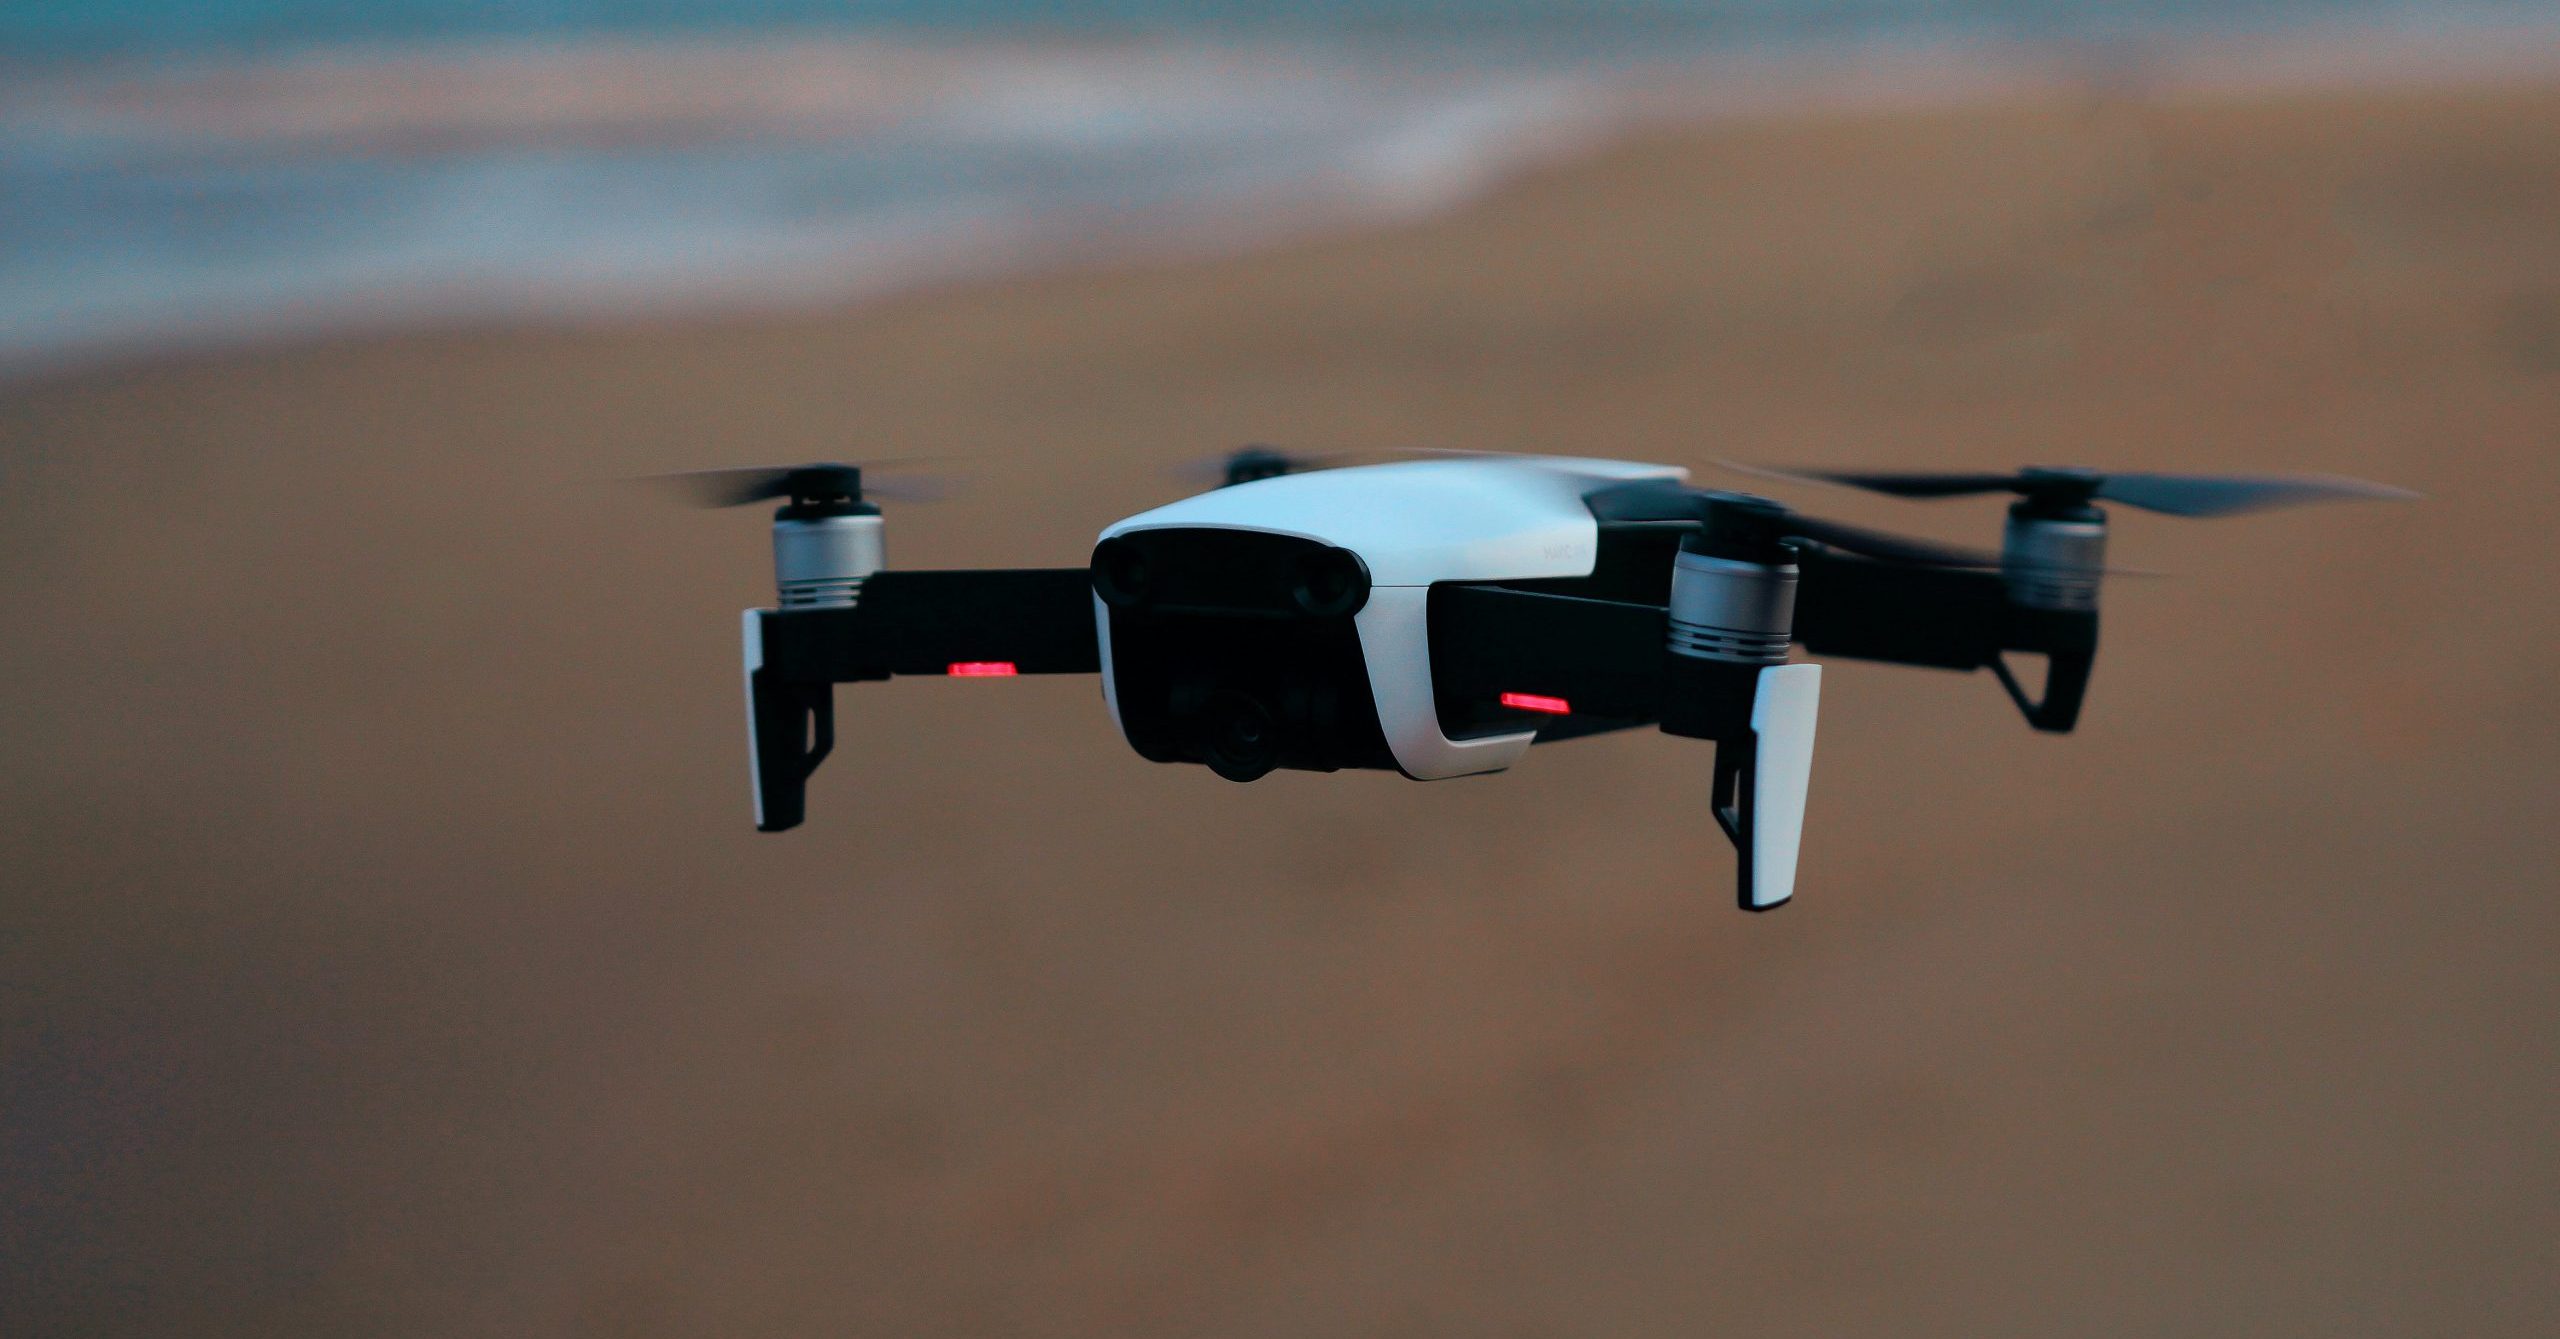 Speaker event: Data Needed from Drones? Yes, and the Data is Rich. Recovery of a Drone.